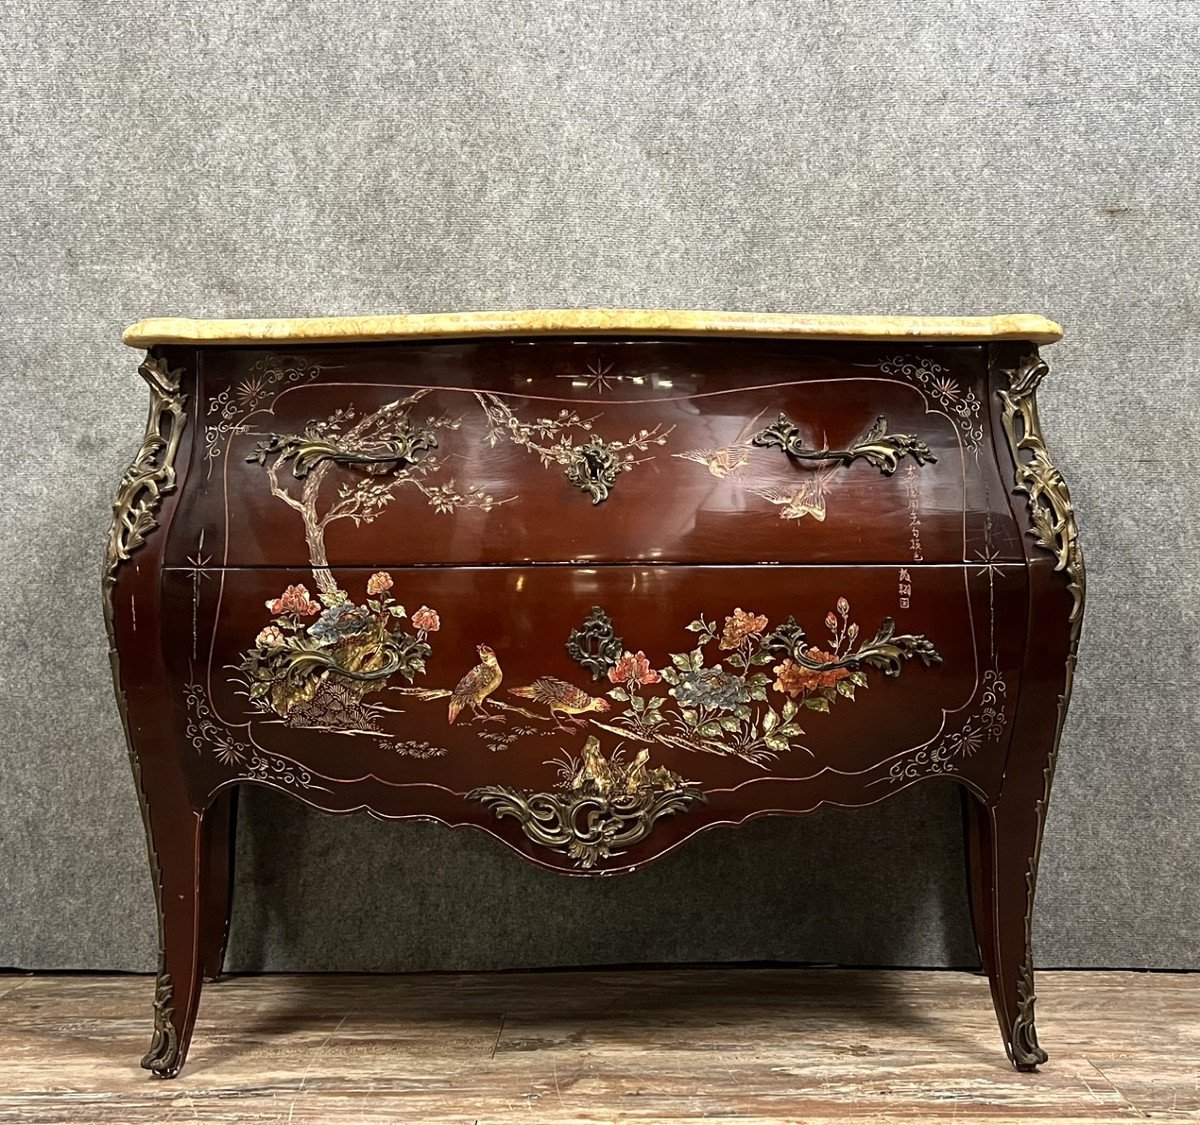 Curved Sauteuse Commode In Lacquer With Chinese Decor 20th Century (b)   